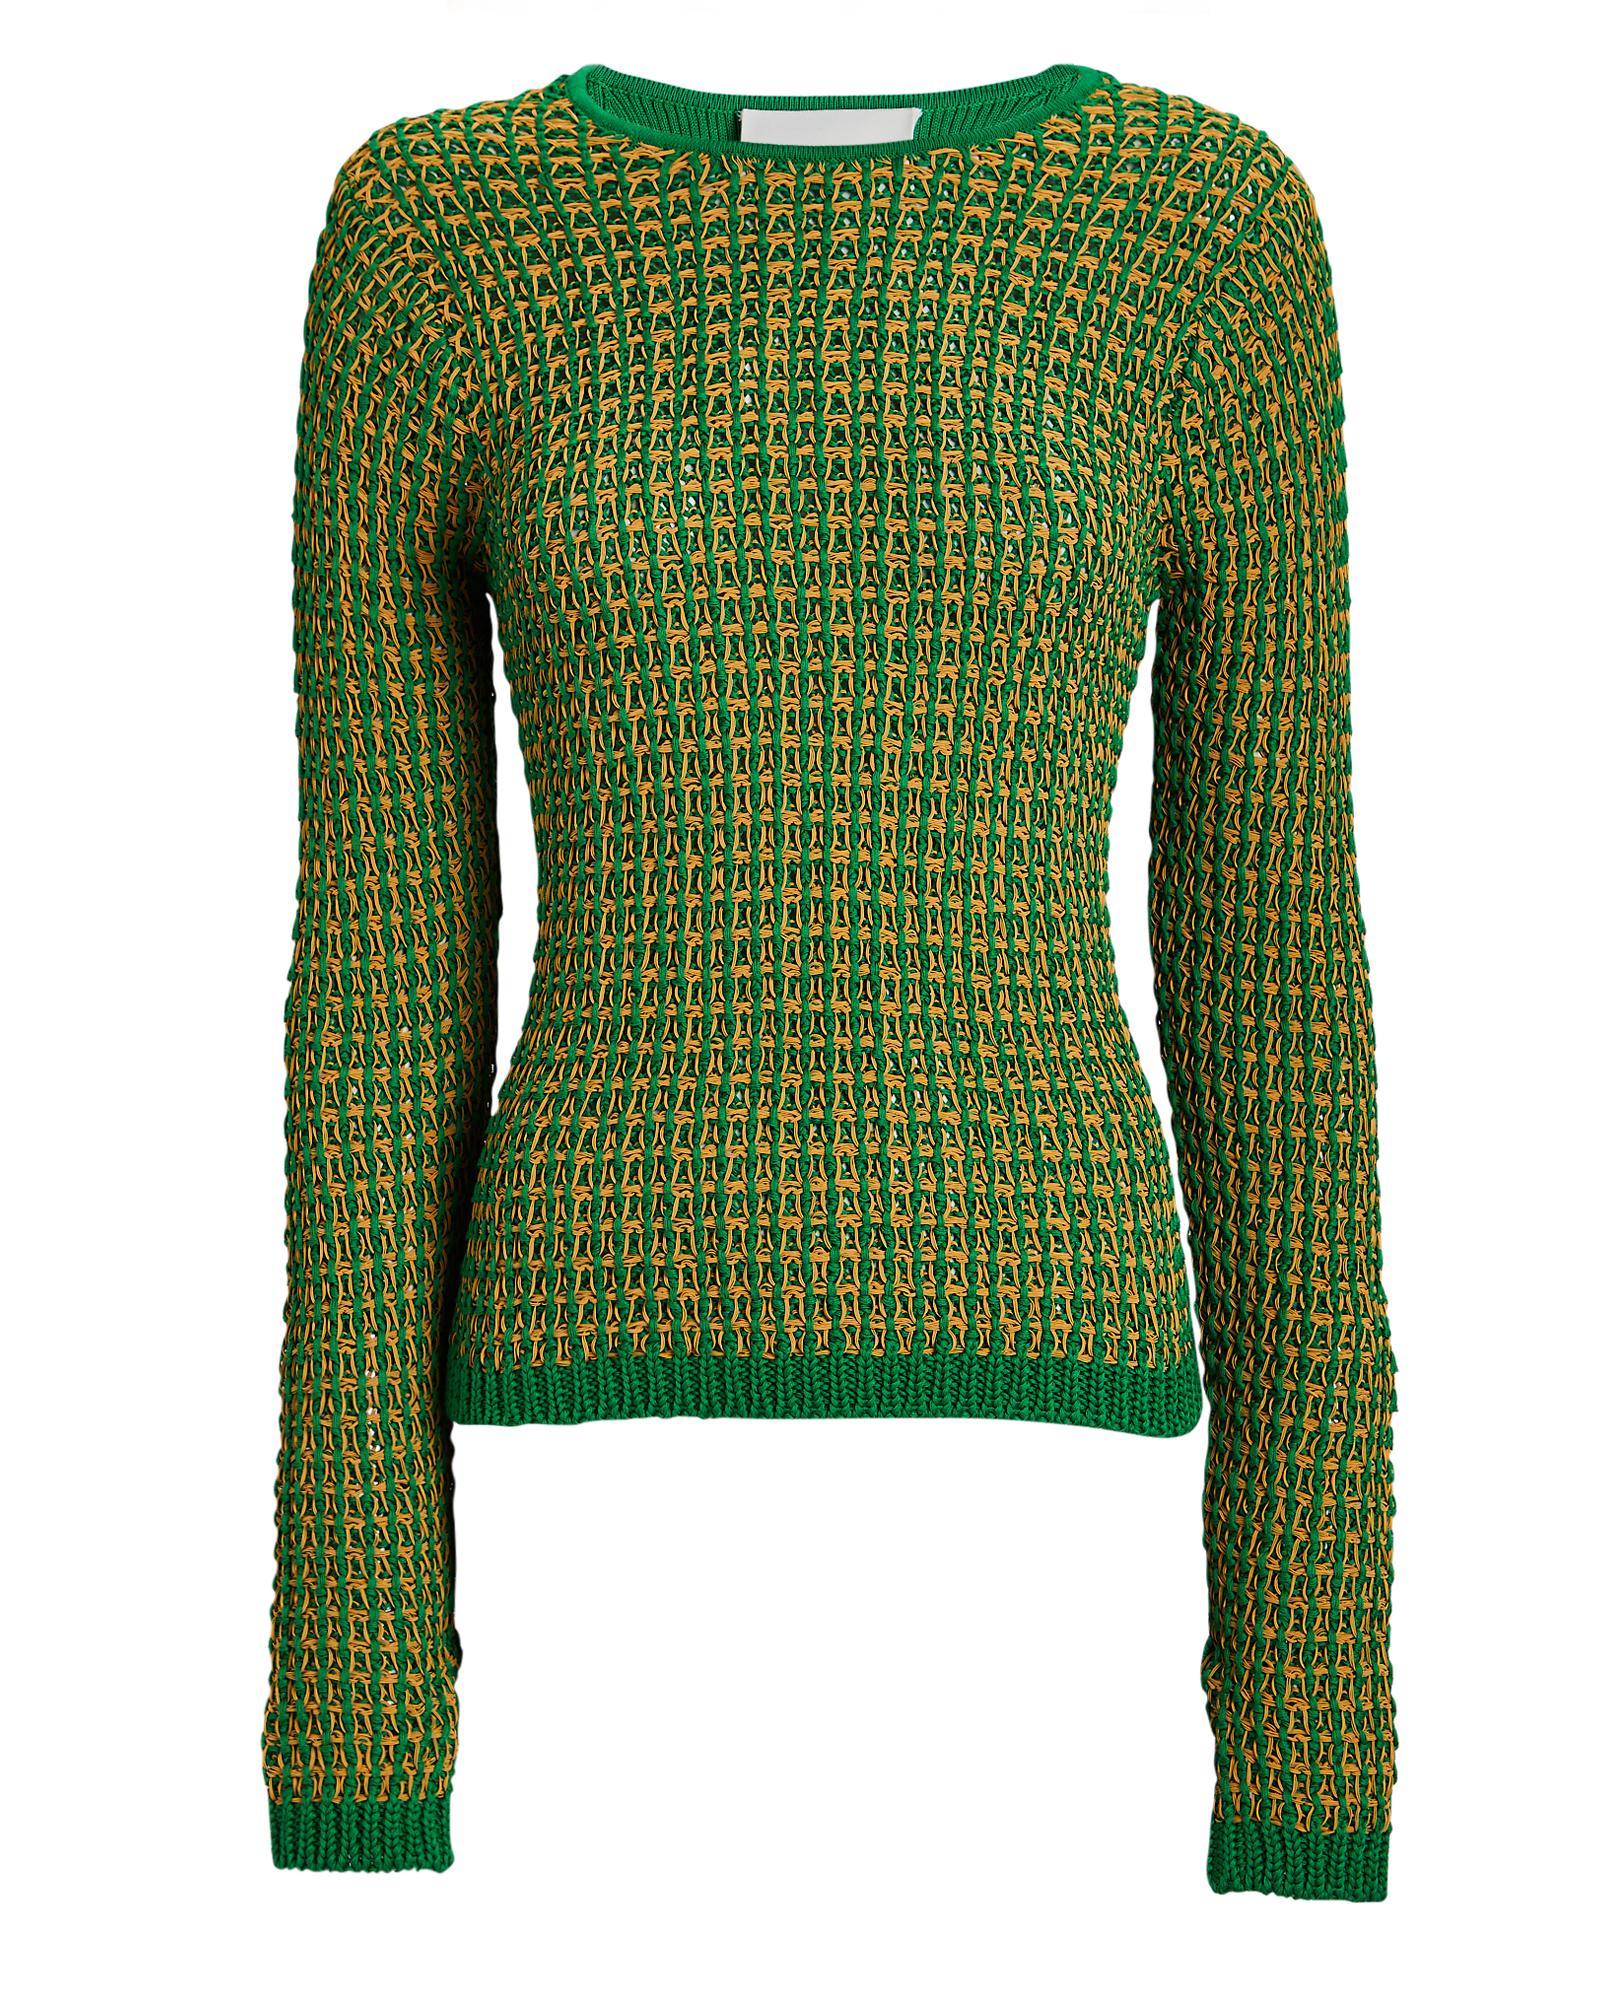 3.1 Phillip Lim Open-knit Cotton Sweater in Green | Lyst